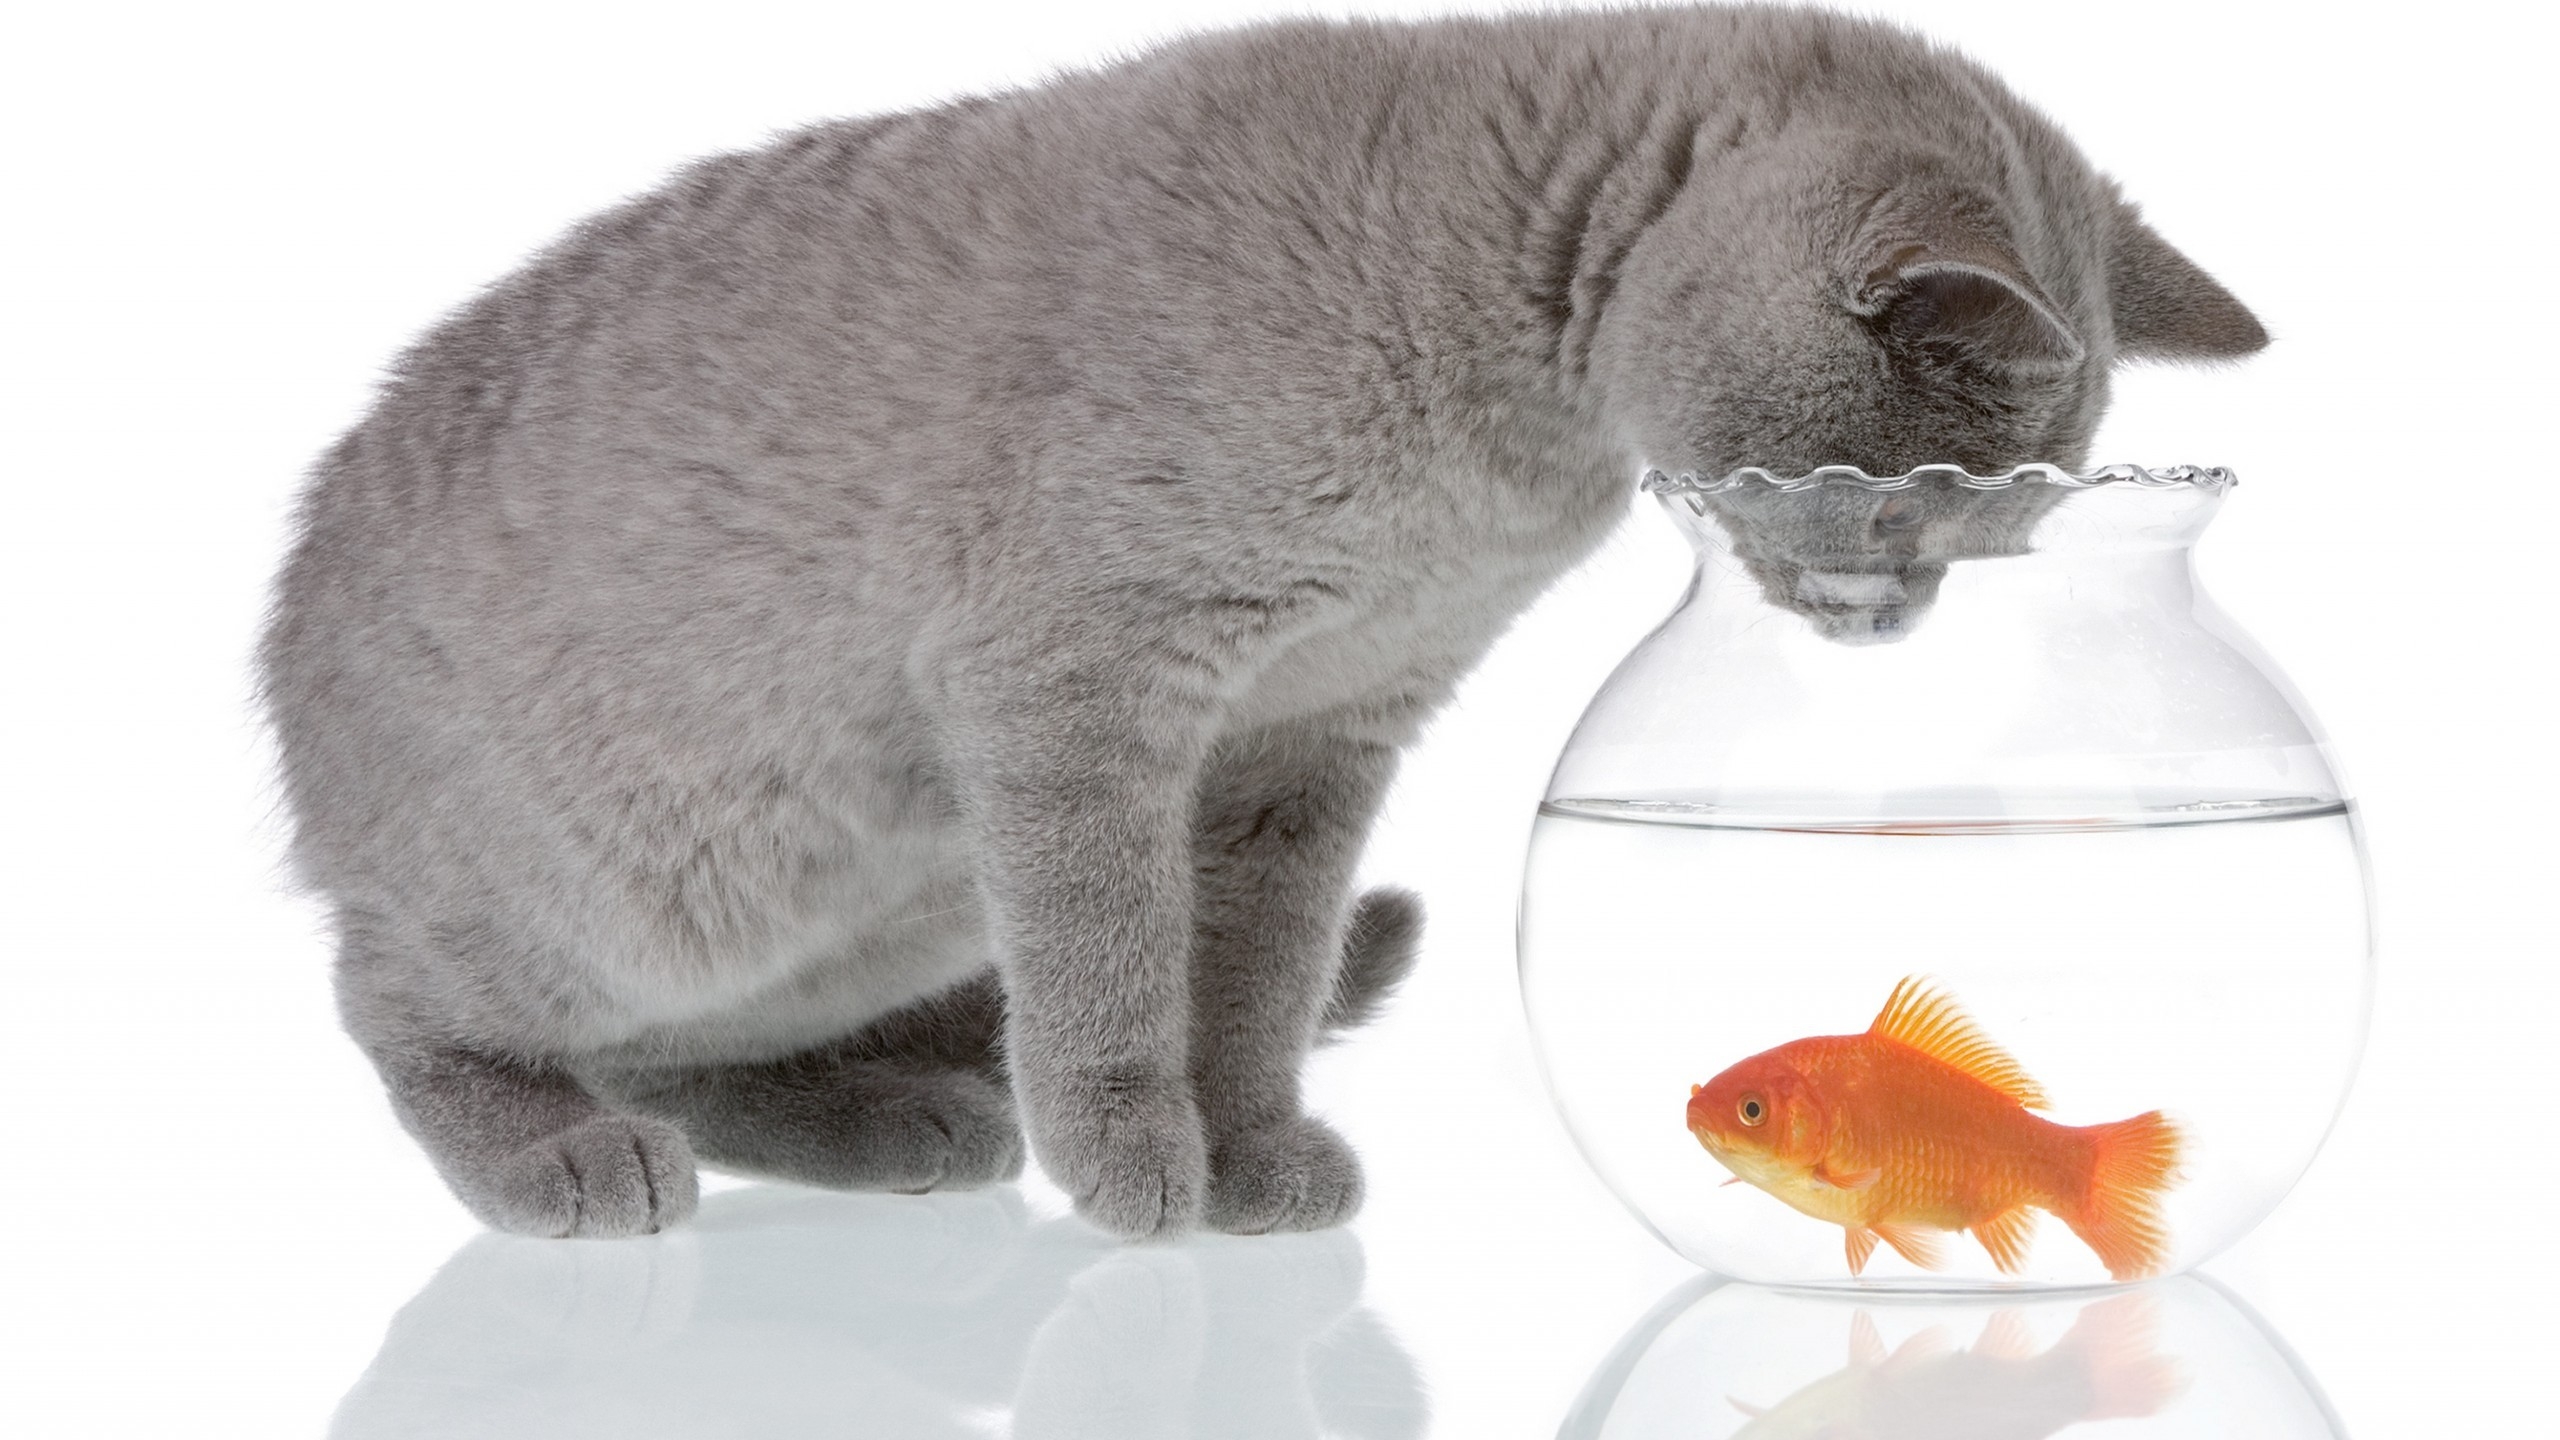 Cat and Fishbowl for 2560x1440 HDTV resolution